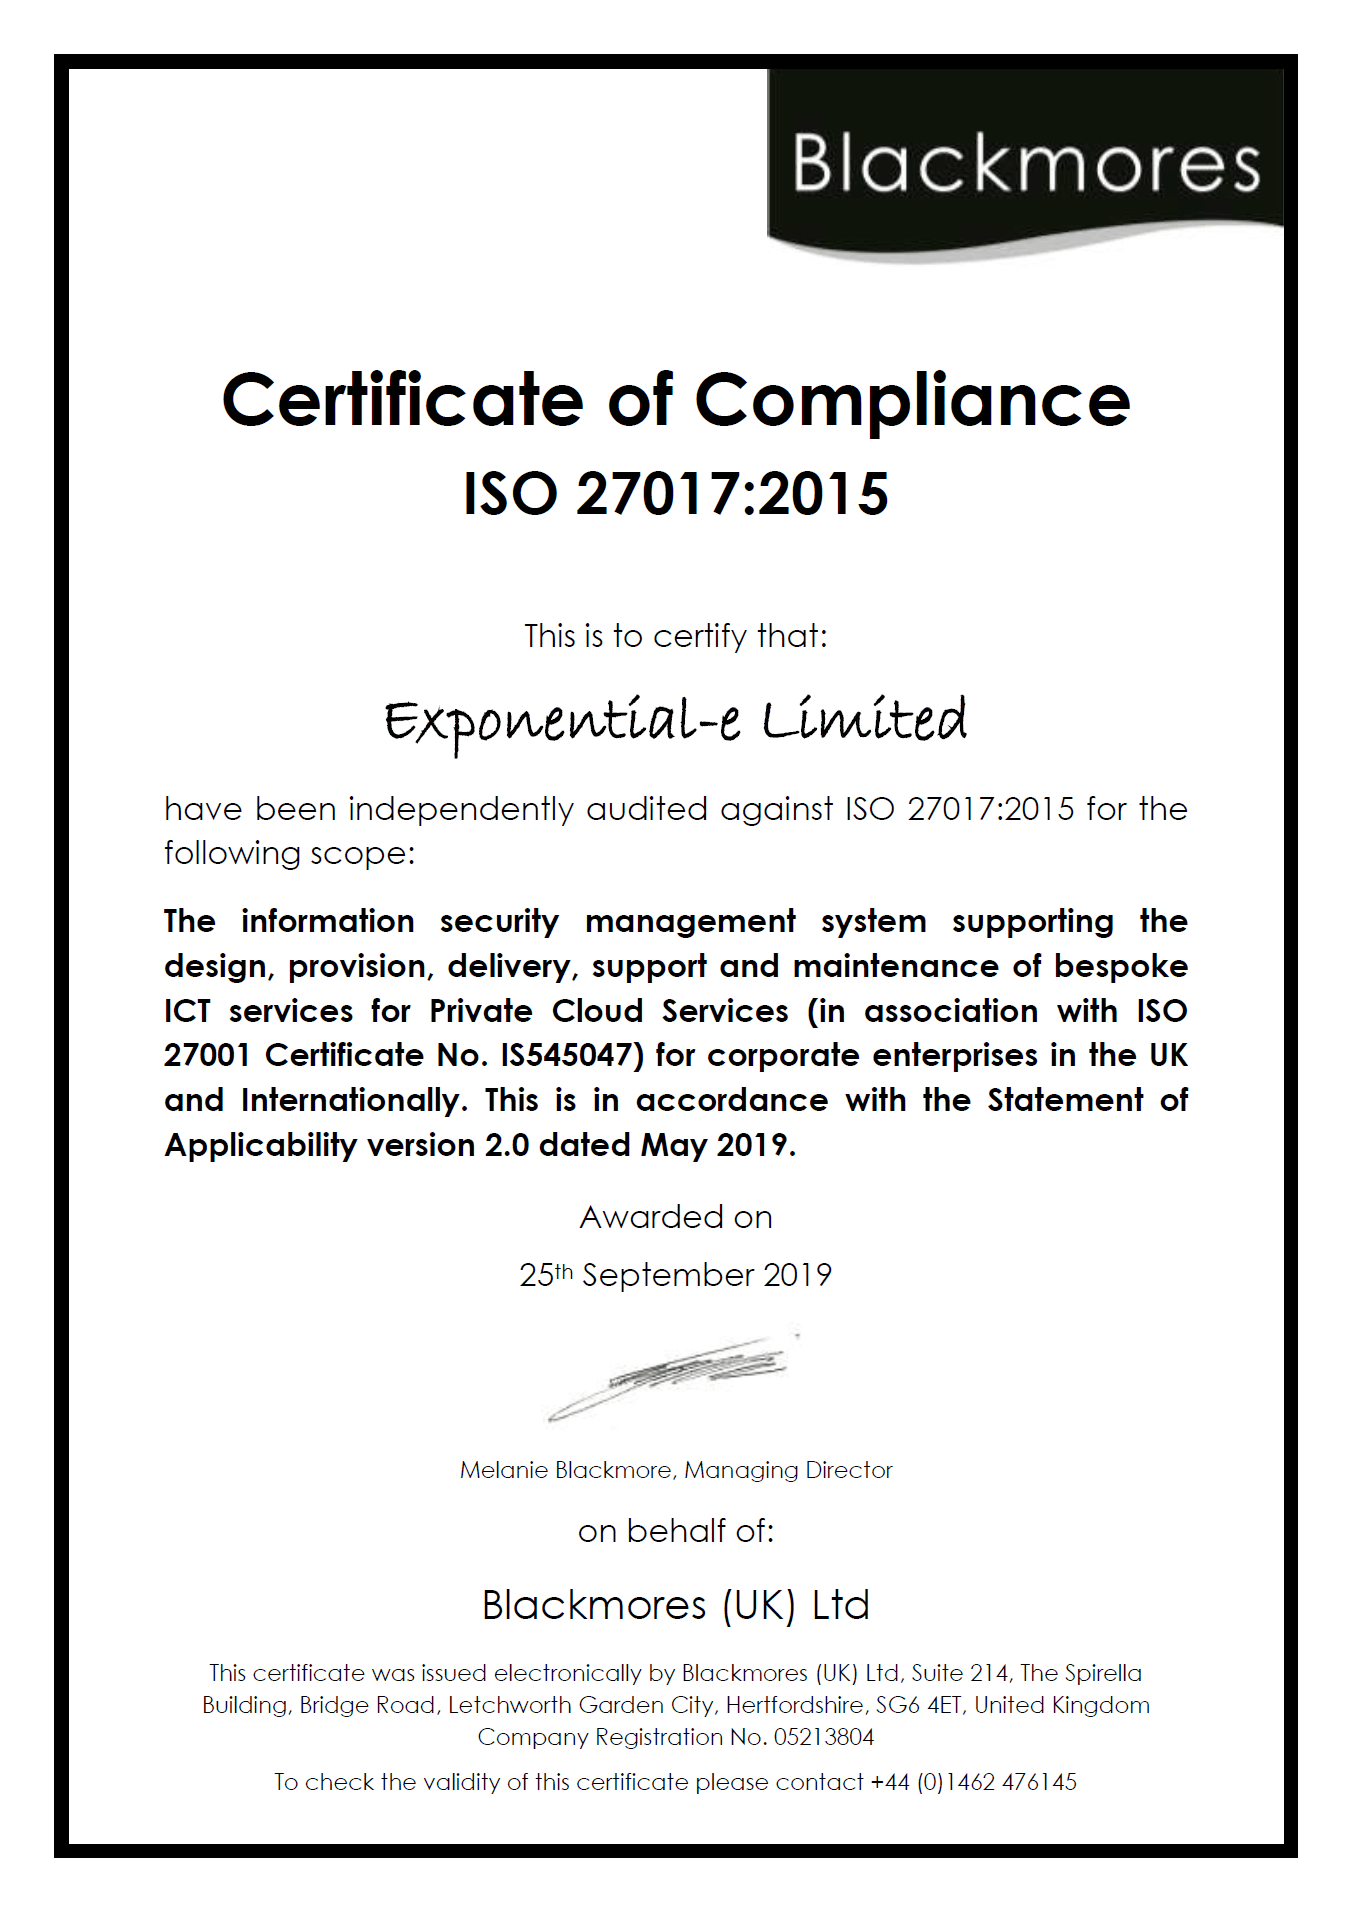 iso-27017-2015-information-technology-security-controls-for-cloud-services.png